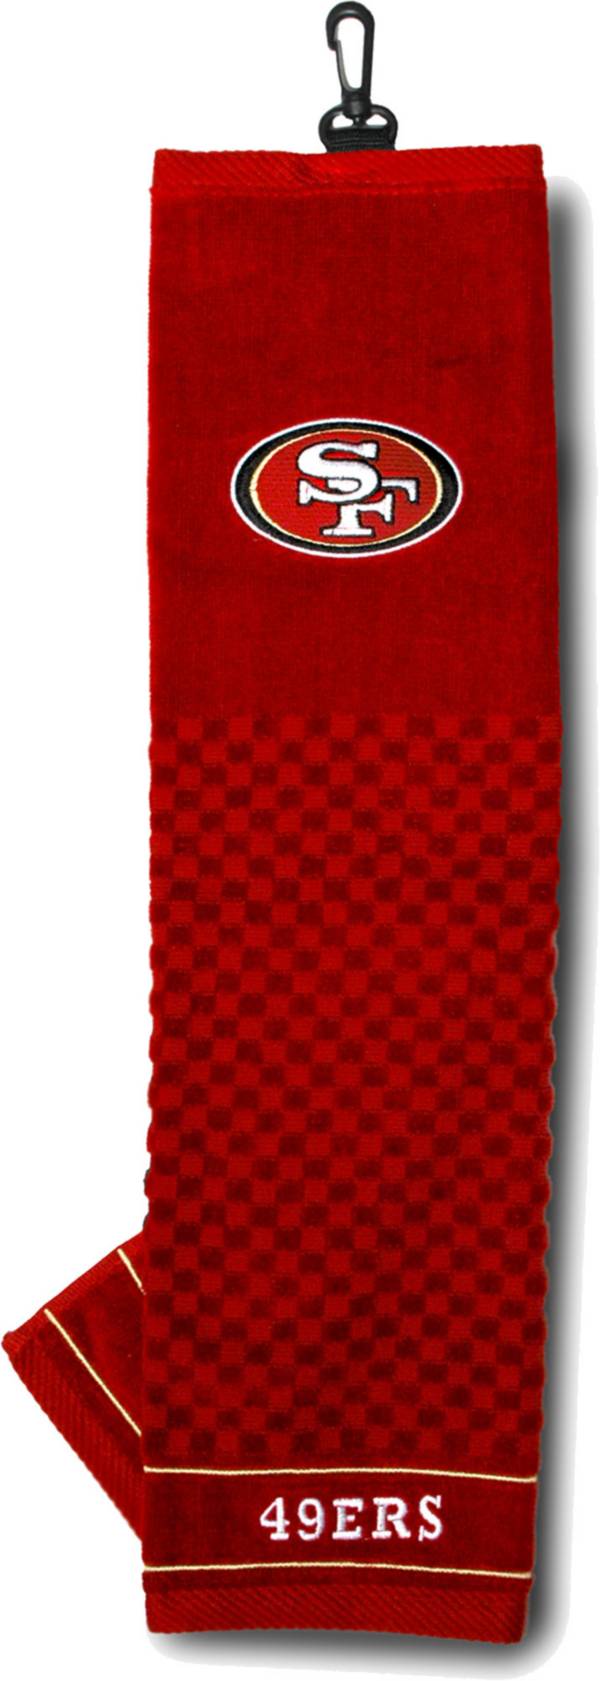 Team Golf San Francisco 49ers Embroidered Towel product image